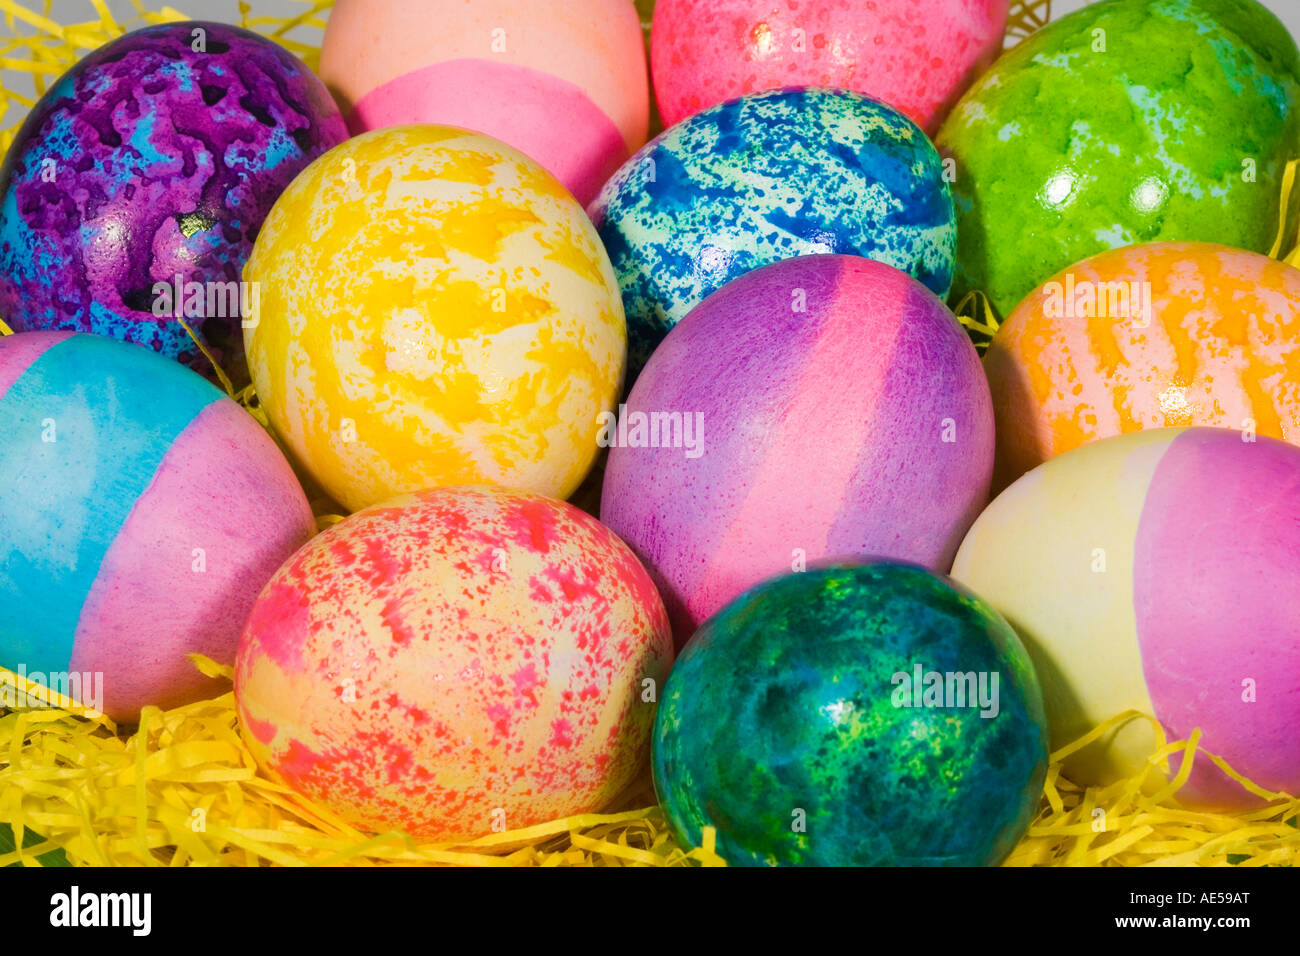 Closeup of a straw Easter basket filled with a dozen coloured eggs of bright colors and patterns Stock Photo